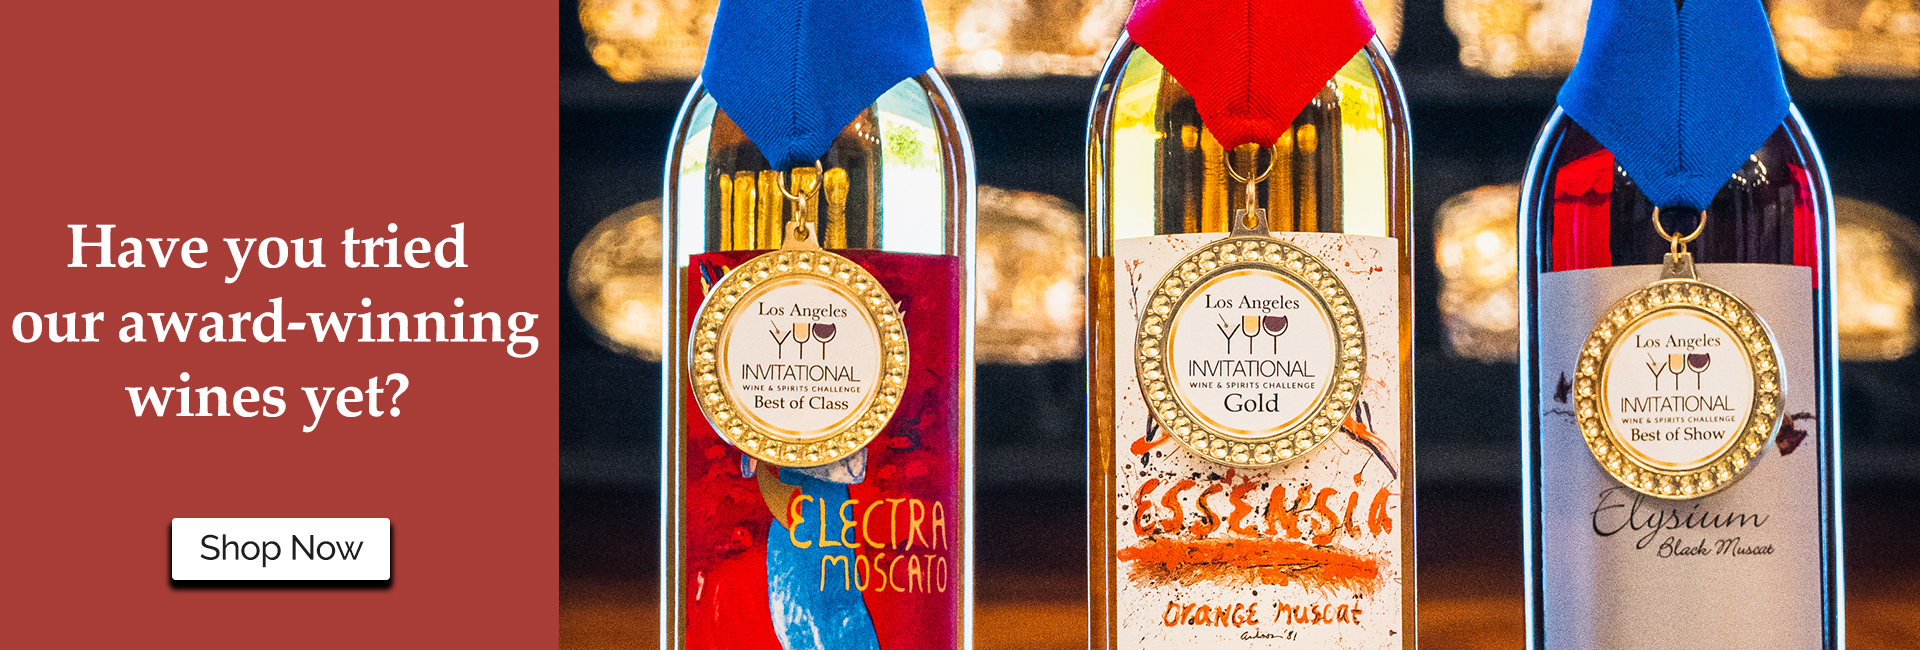 Electra Moscato, Essensia, and Elysium with medals